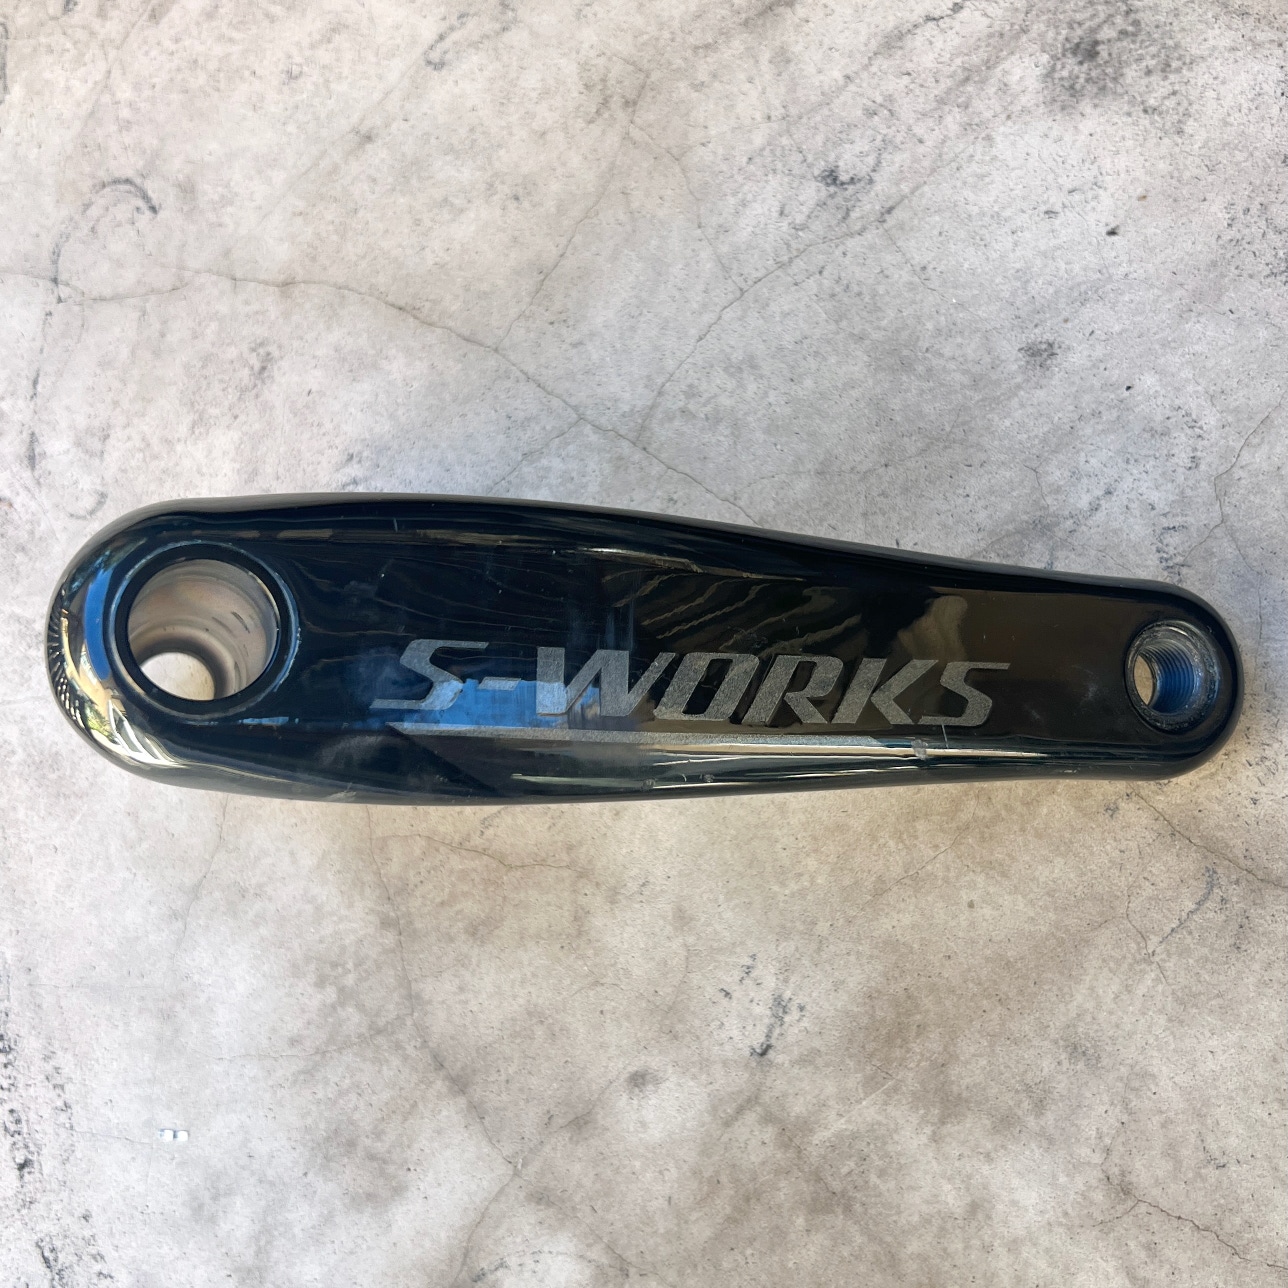 Specialized S-Works Non Drive Side Carbon Left Crank Arm 170 mm